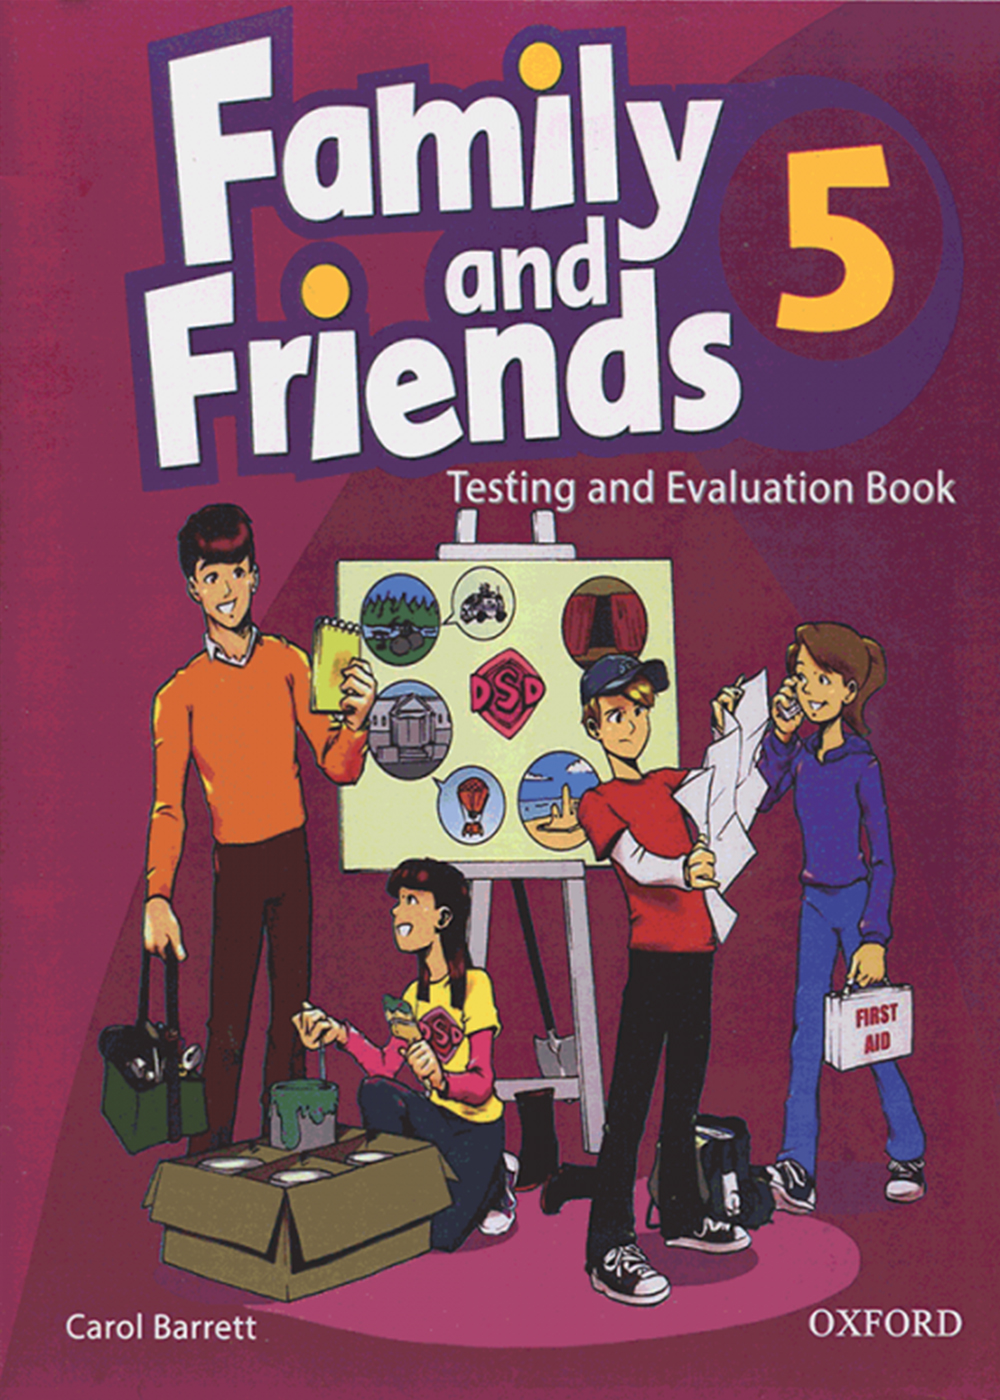 Friend masters. Family and friends 5 Testing and evaluation book. Фэмили френдс 5. Oxford Family and friends 5 класс. Test book 5 класс Family and friends.